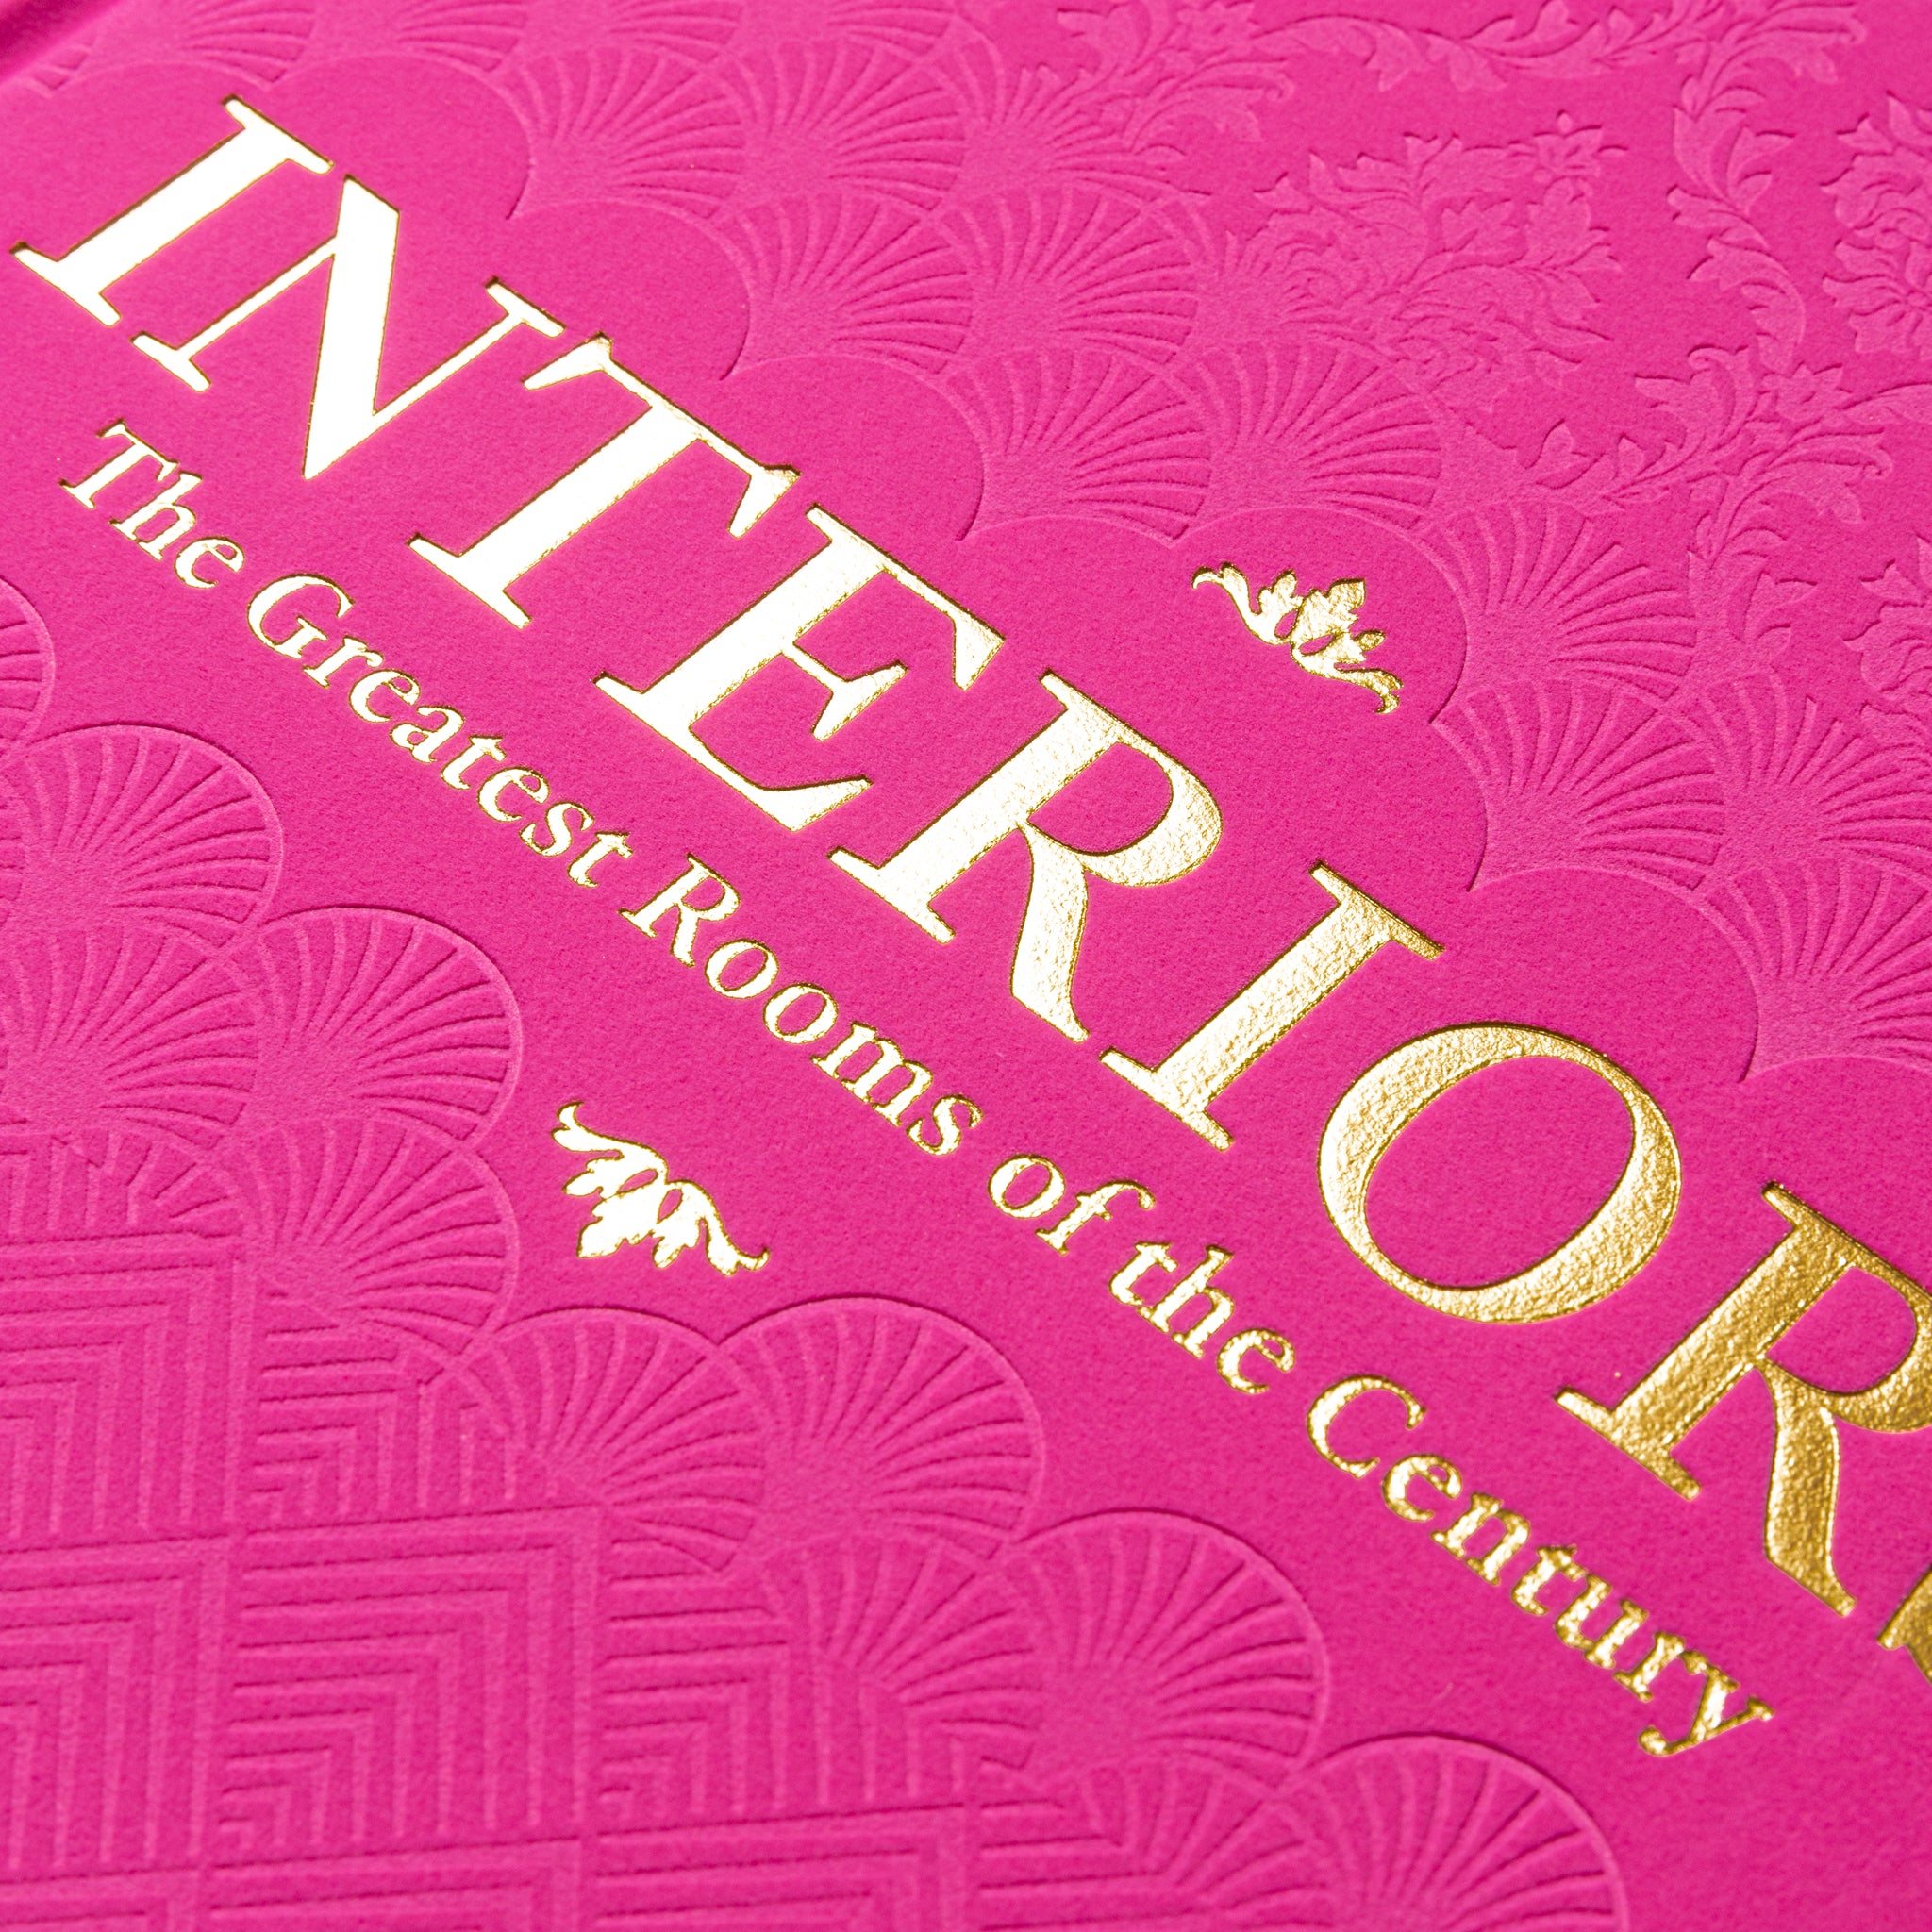 INTERIORS: THE GREATEST ROOMS OF THE CENTURY (PINK EDITION)